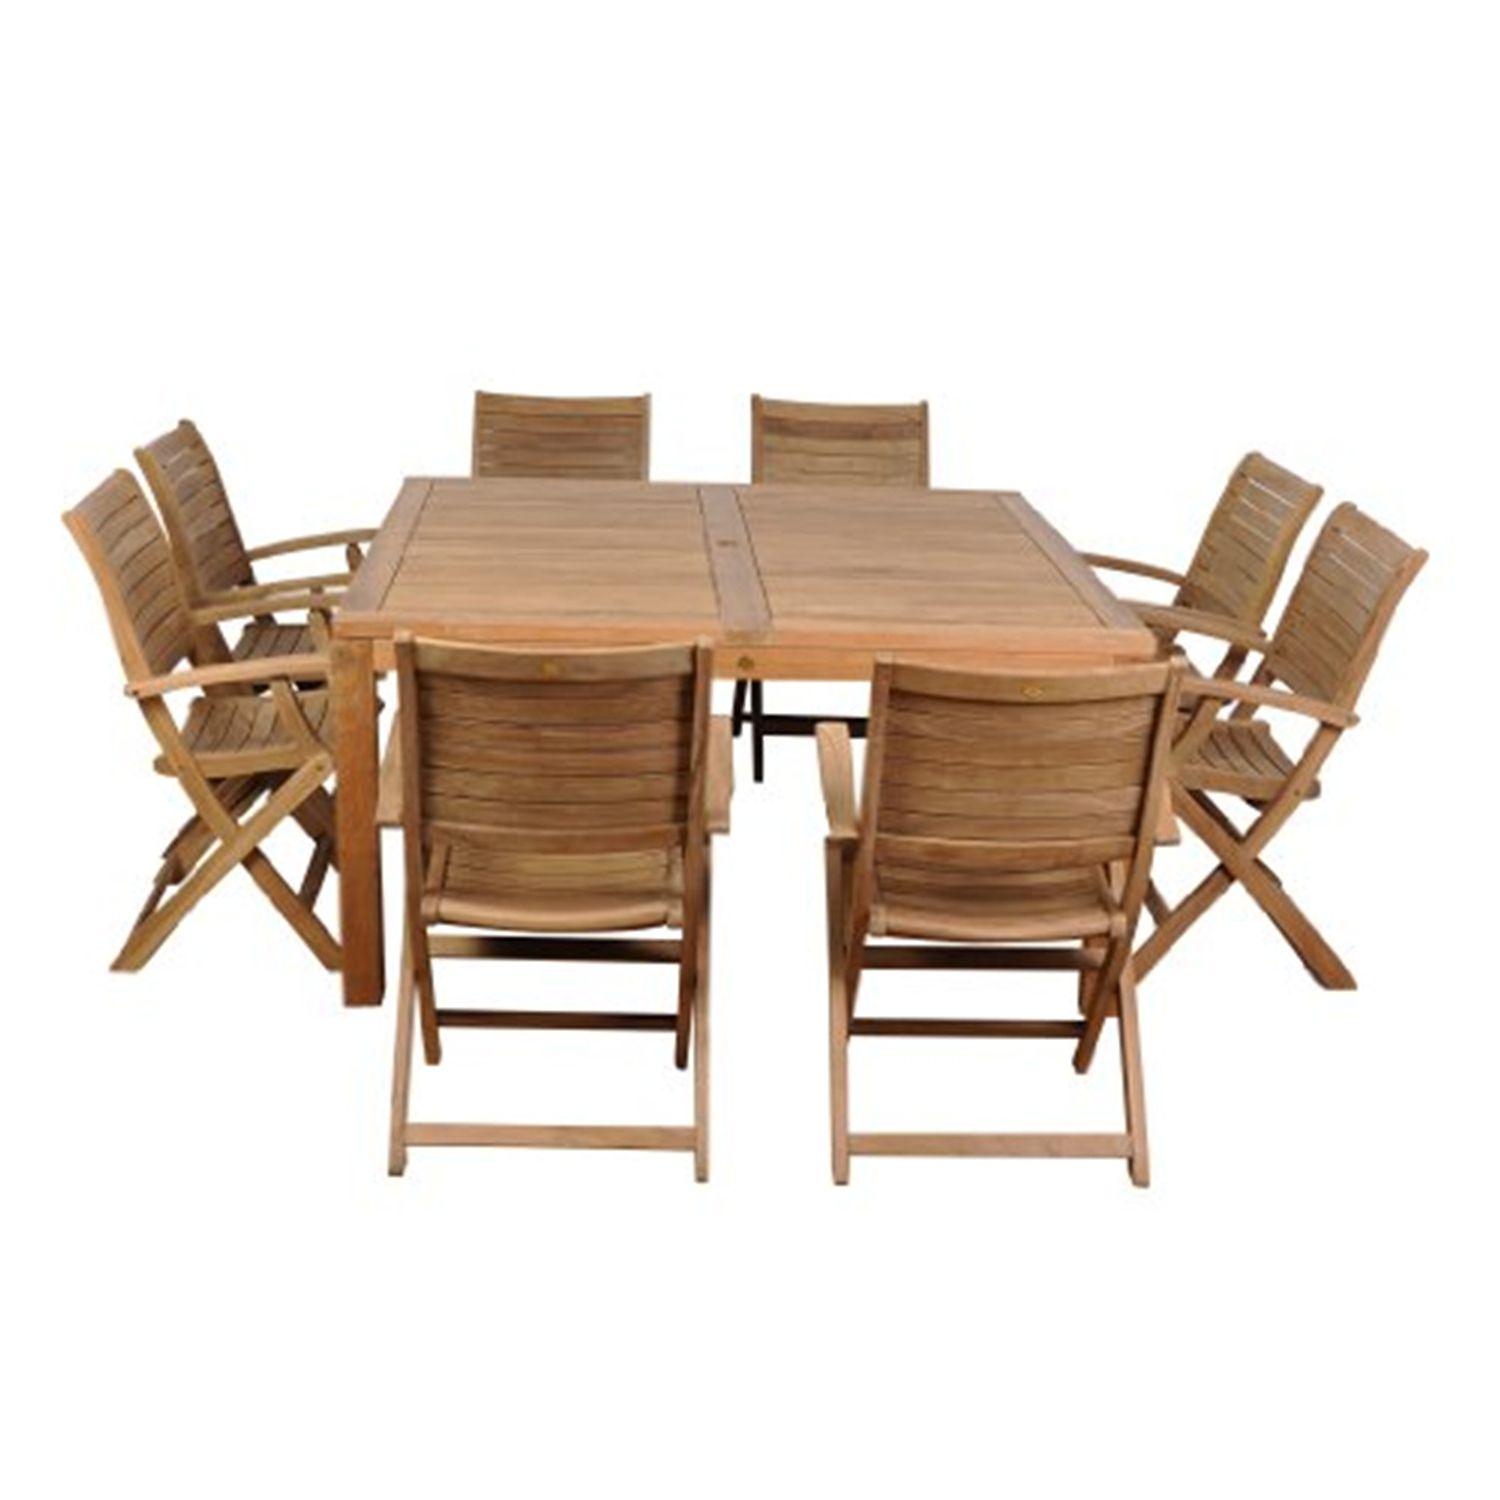 Boynton 9 Piece Teak Square Patio Dining Set – Walmart – Walmart With Fashionable Square 9 Piece Outdoor Dining Sets (View 13 of 15)